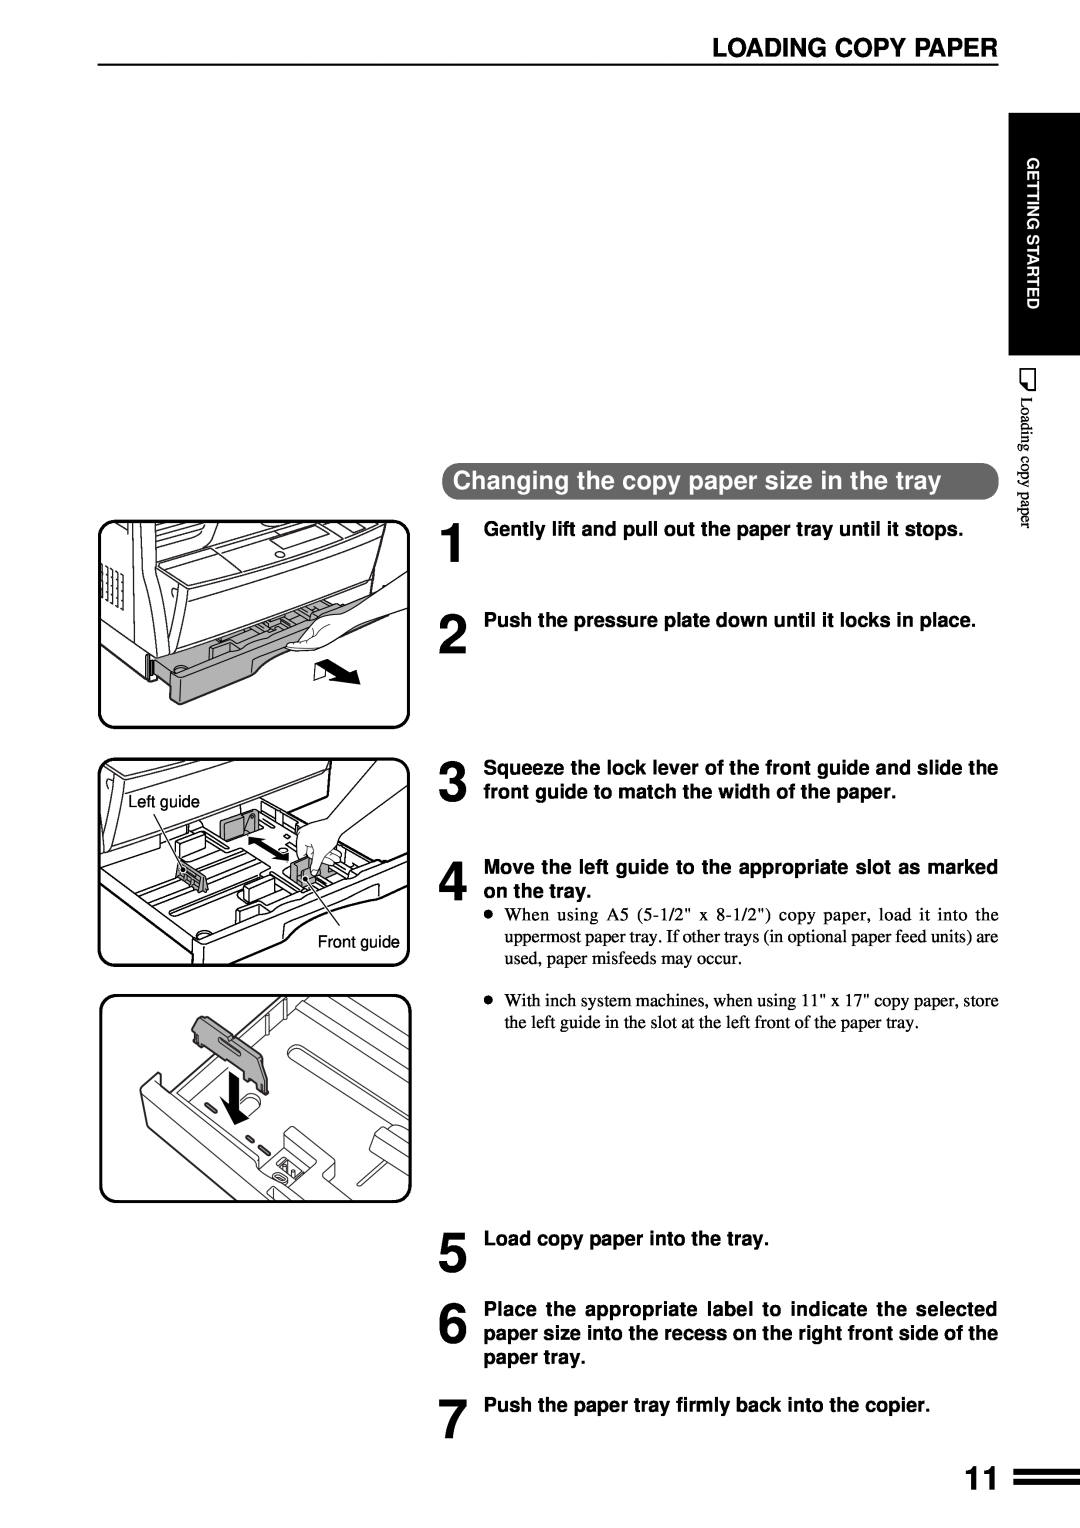 Sharp AR-163 Loading Copy Paper, Squeeze the lock lever of the front guide and slide the, Left guide, Getting Started 